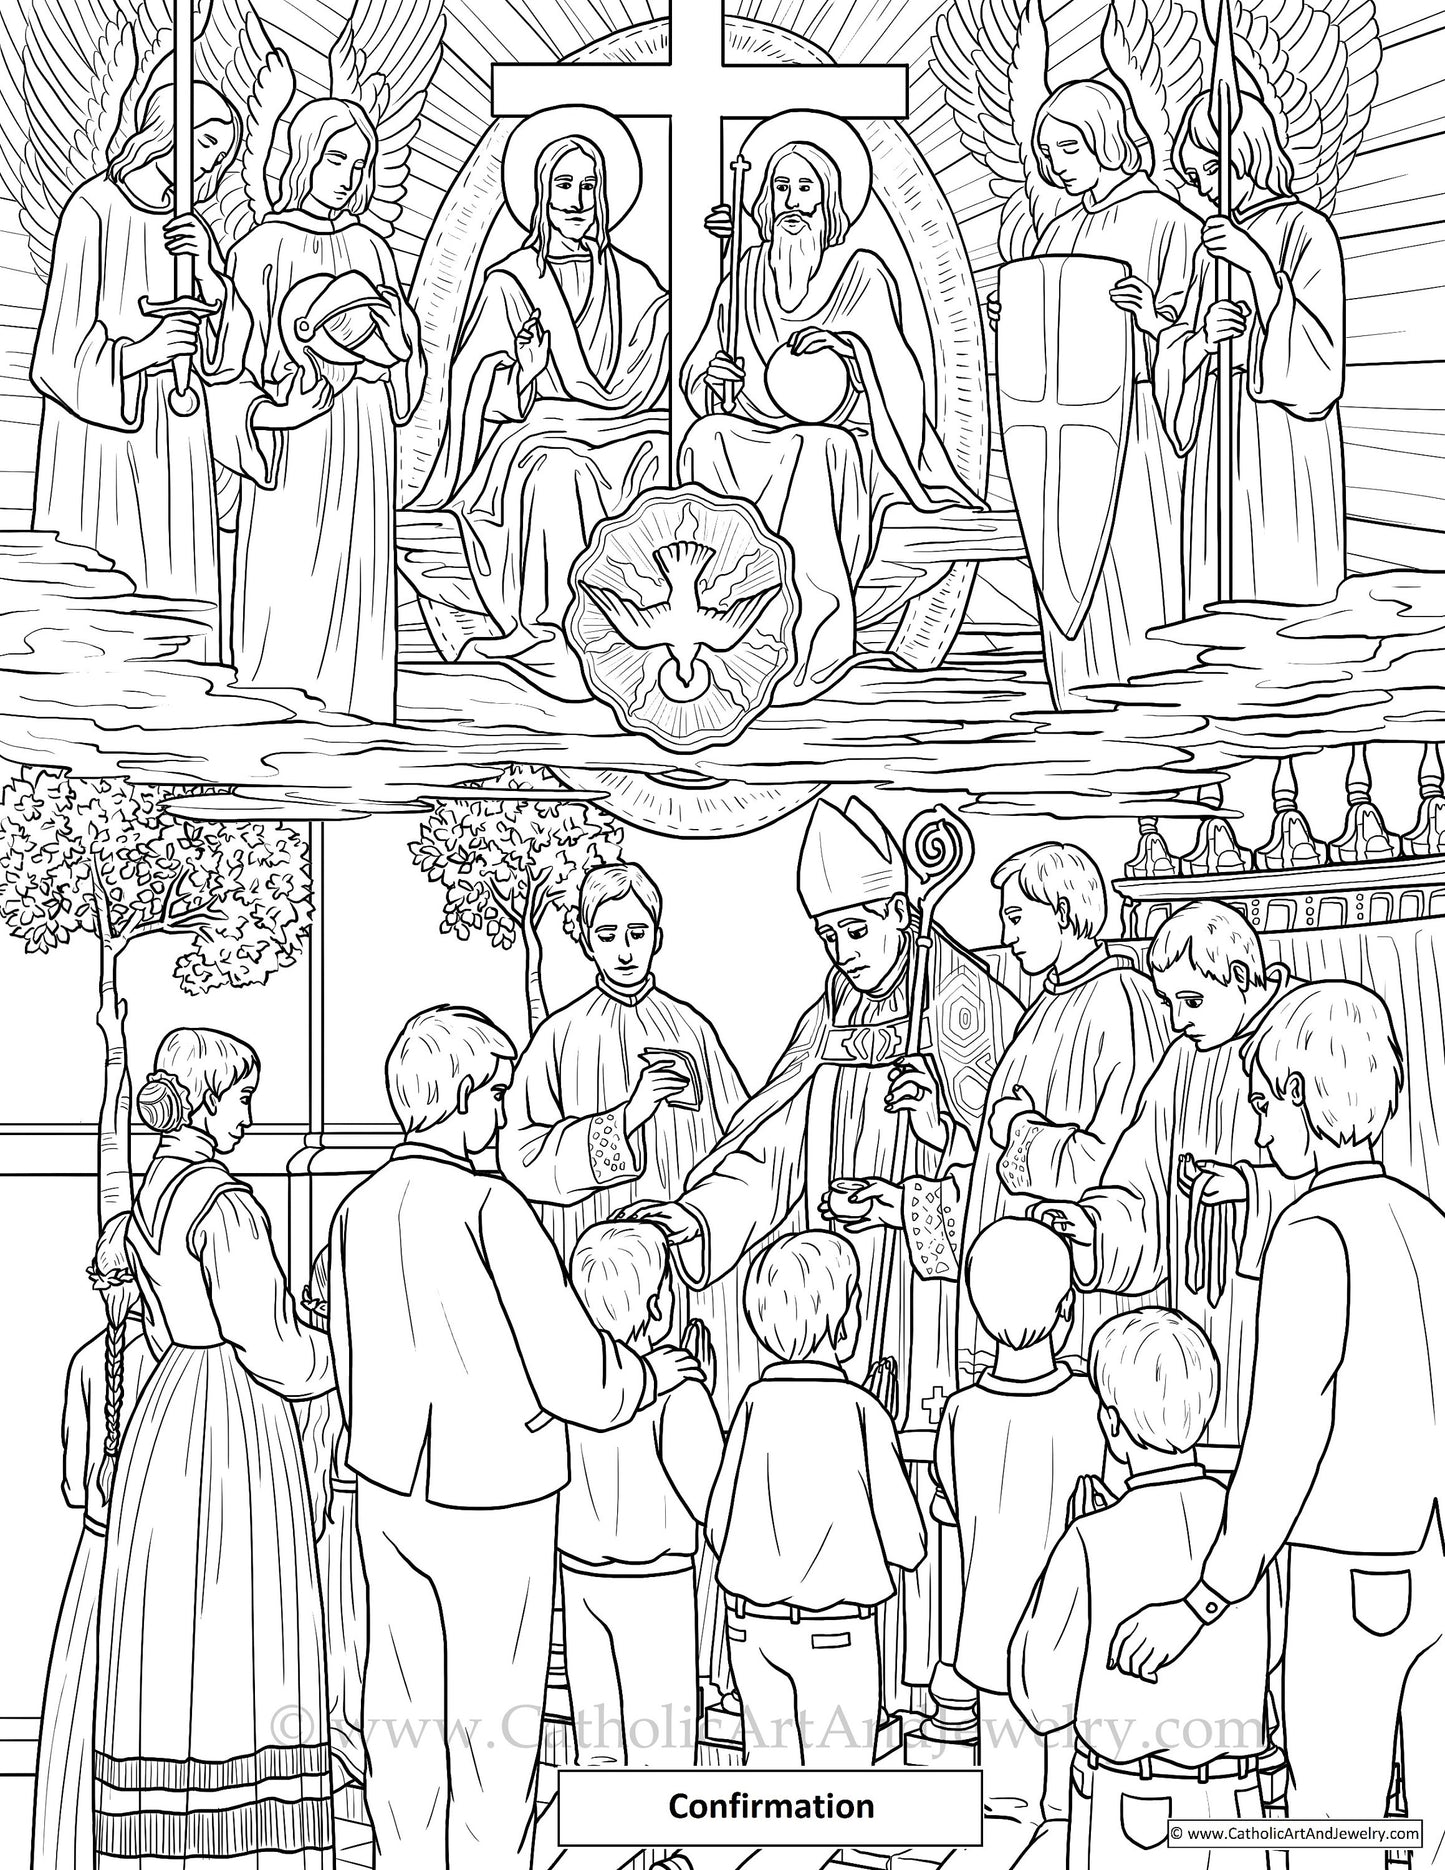 DOWNLOADABLE 7 Sacraments Coloring Pages – For home, school, or CCD – Catholic Catechism – Catholic Education – Catholic Kids